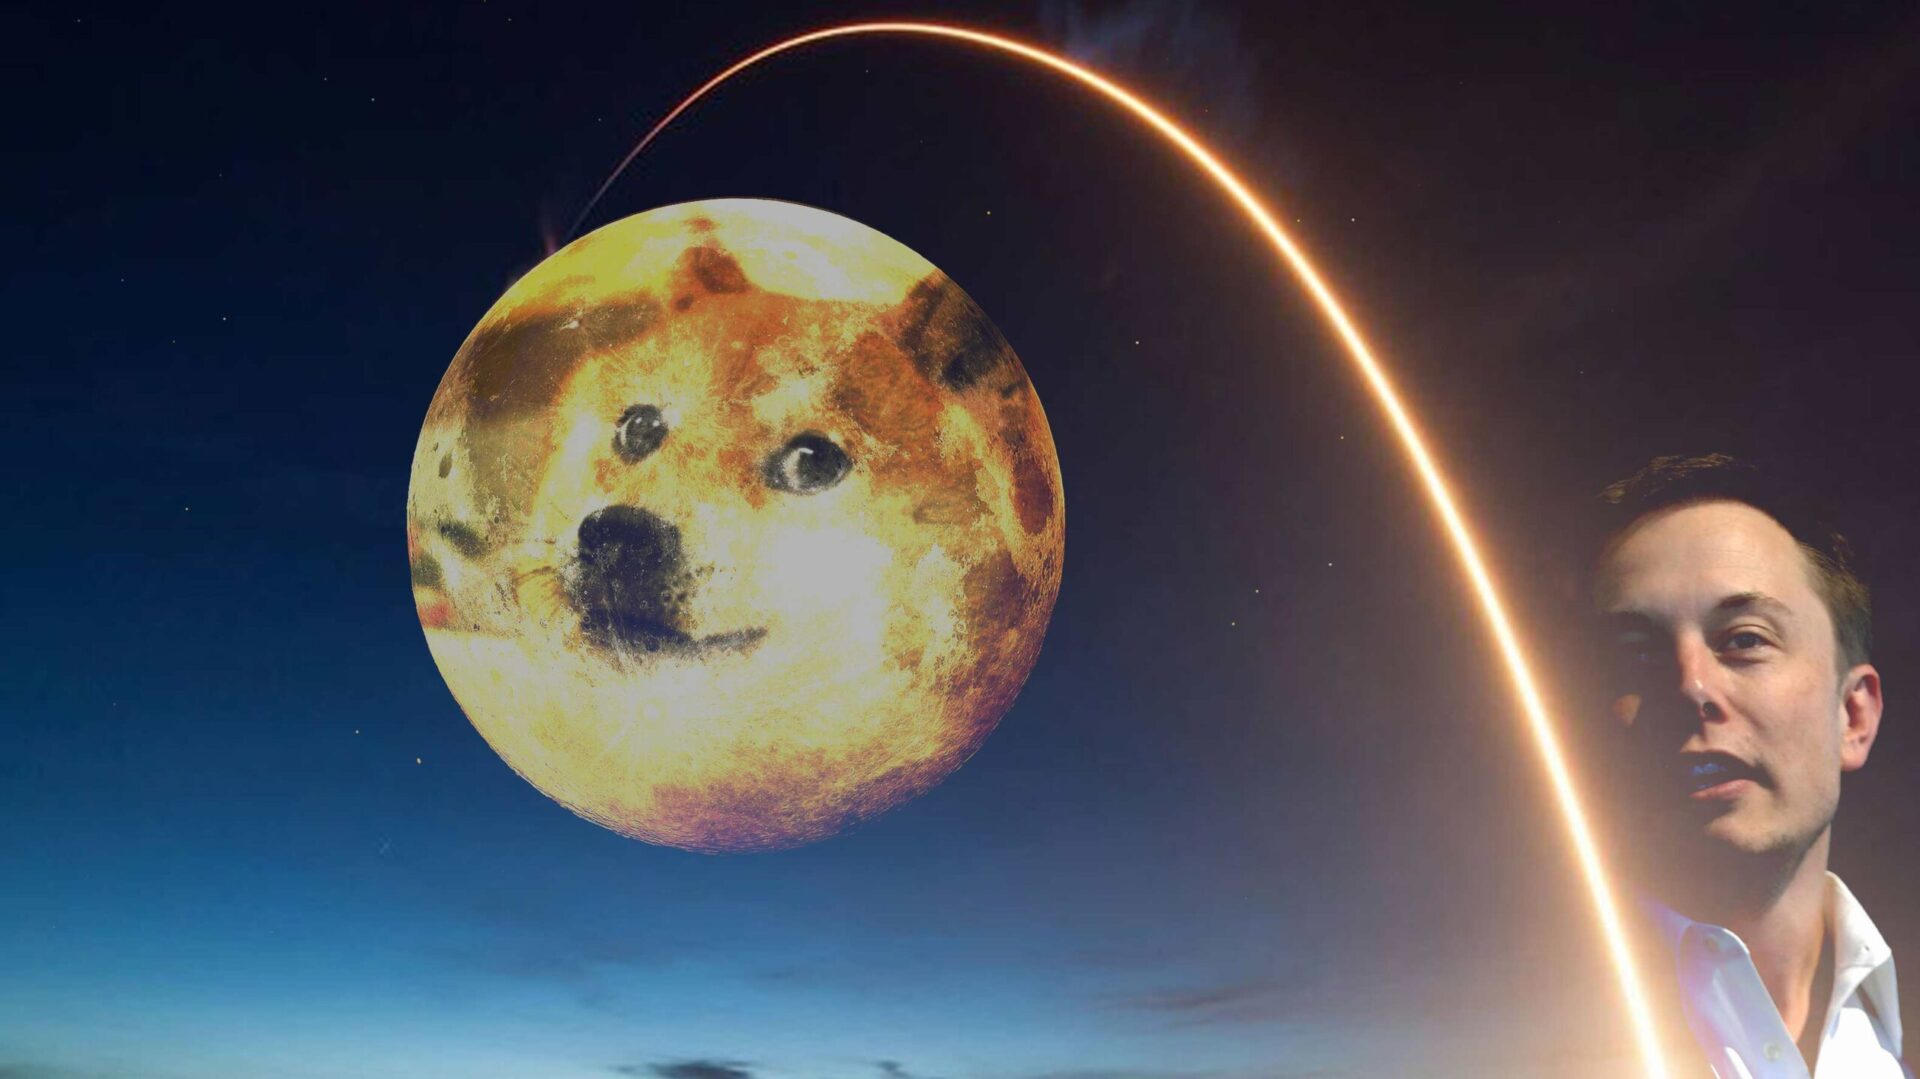 Dogecoin Pushing Ads in Space - Crypto Rand Group